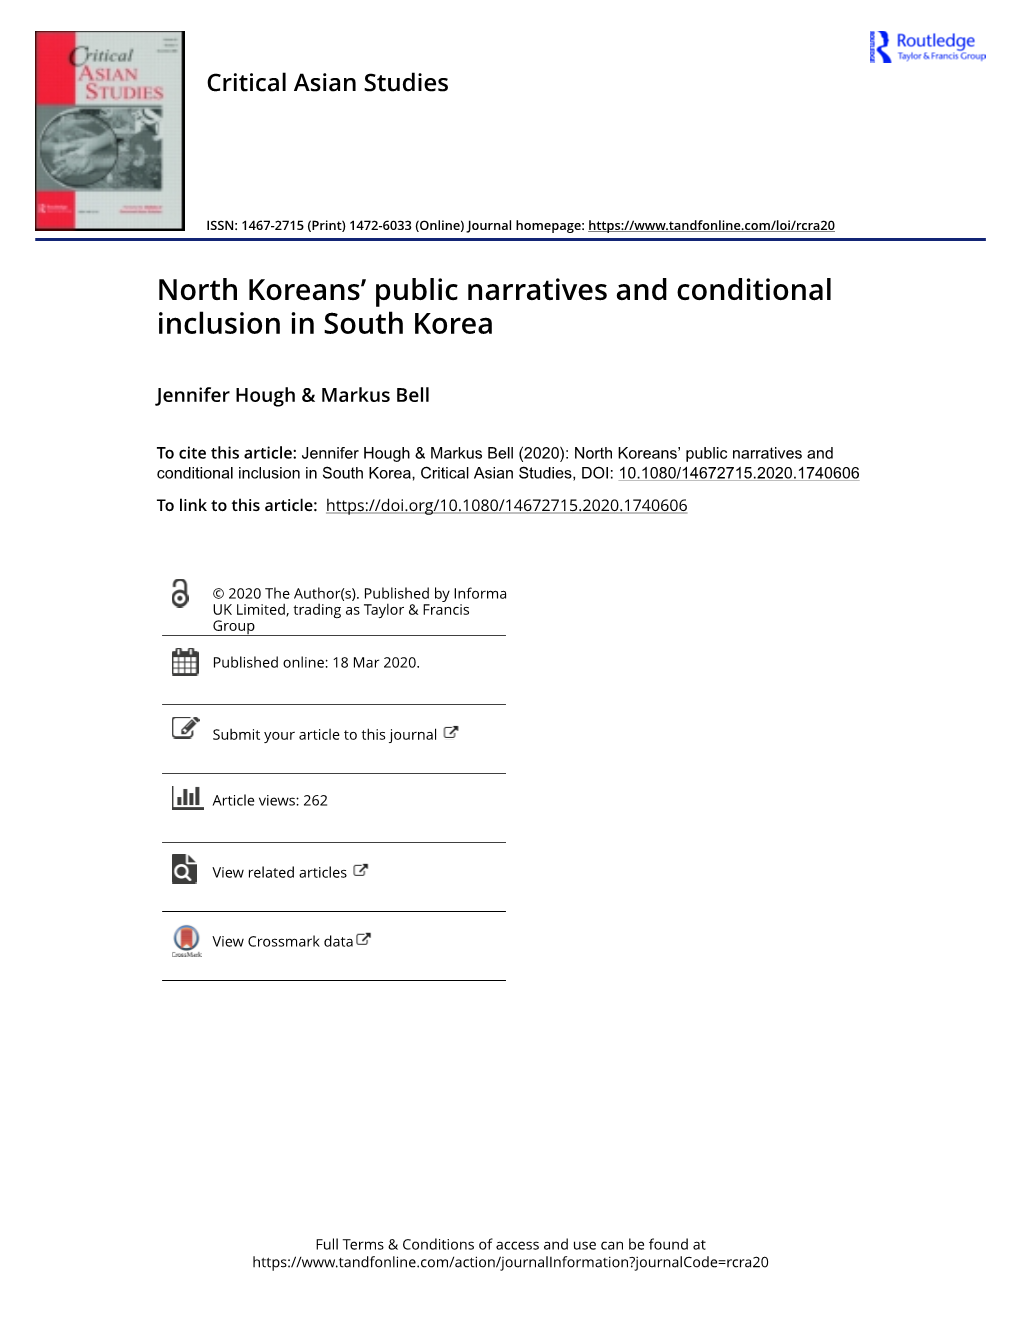 North Koreans' Public Narratives and Conditional Inclusion in South Korea